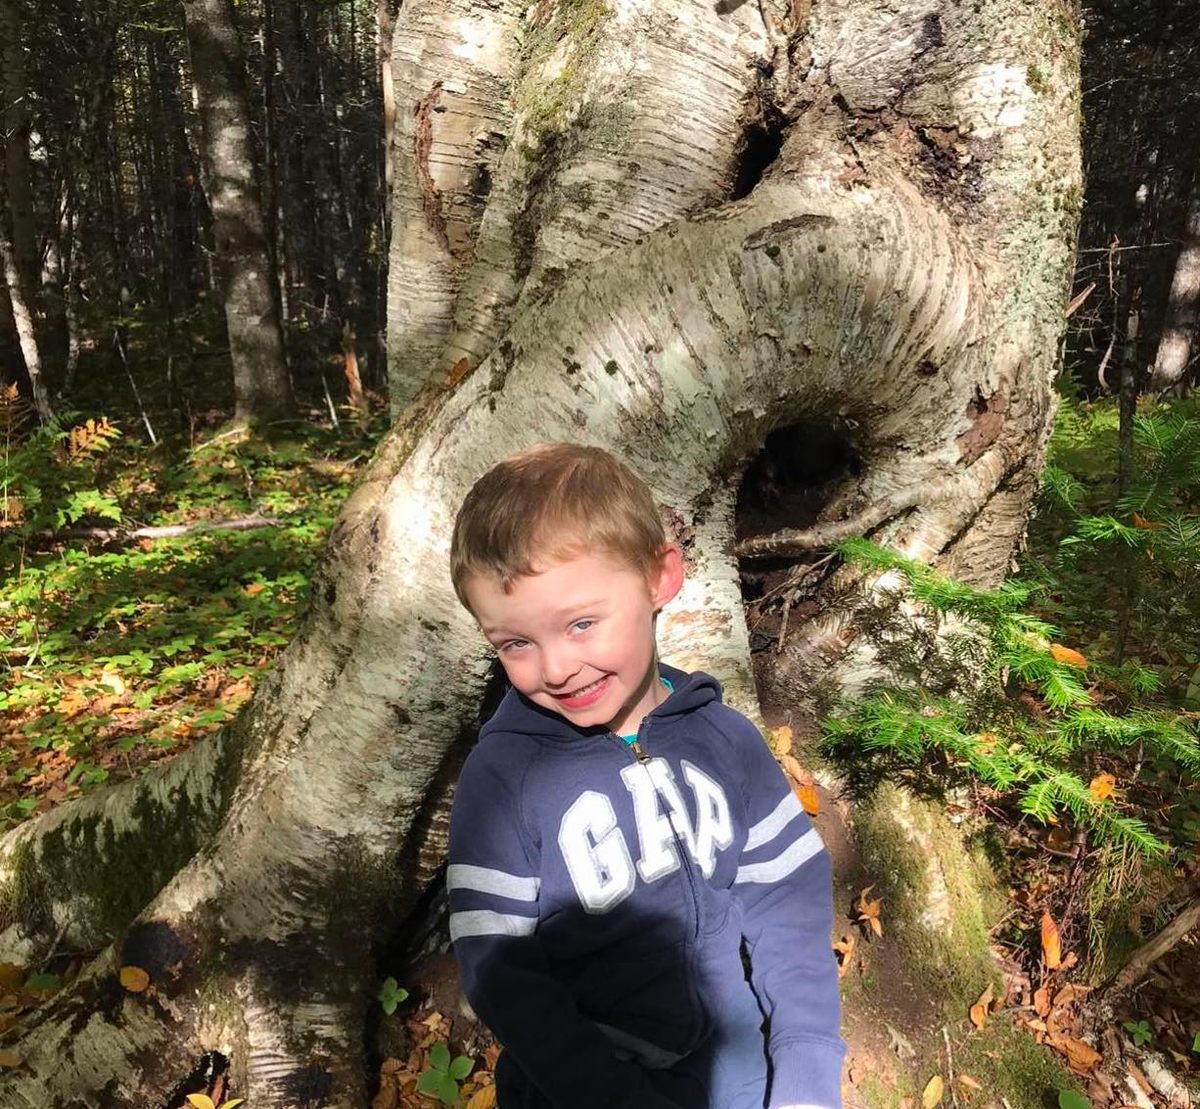 Even before she got a head, hikers took note of the tree's unique shape. Local Tori Hinks's mother took this photo of Tori's son in front of the tree four years ago. 